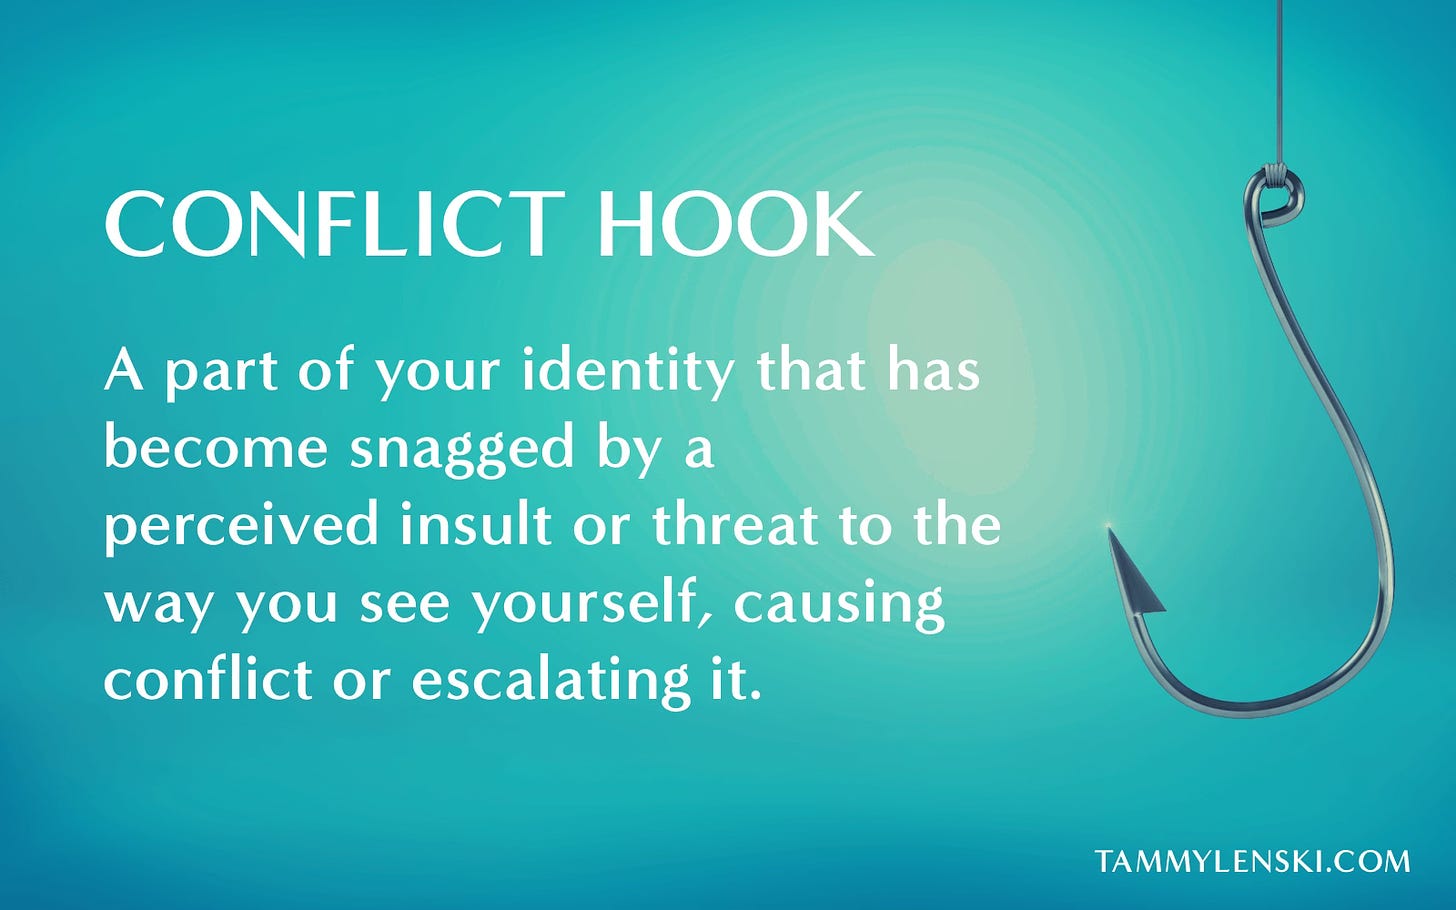 Conflict hook: A part of your identity that has become snagged by a perceived insults or threat to the way you see yourself, causing conflict or escalating it. TammyLenski.com